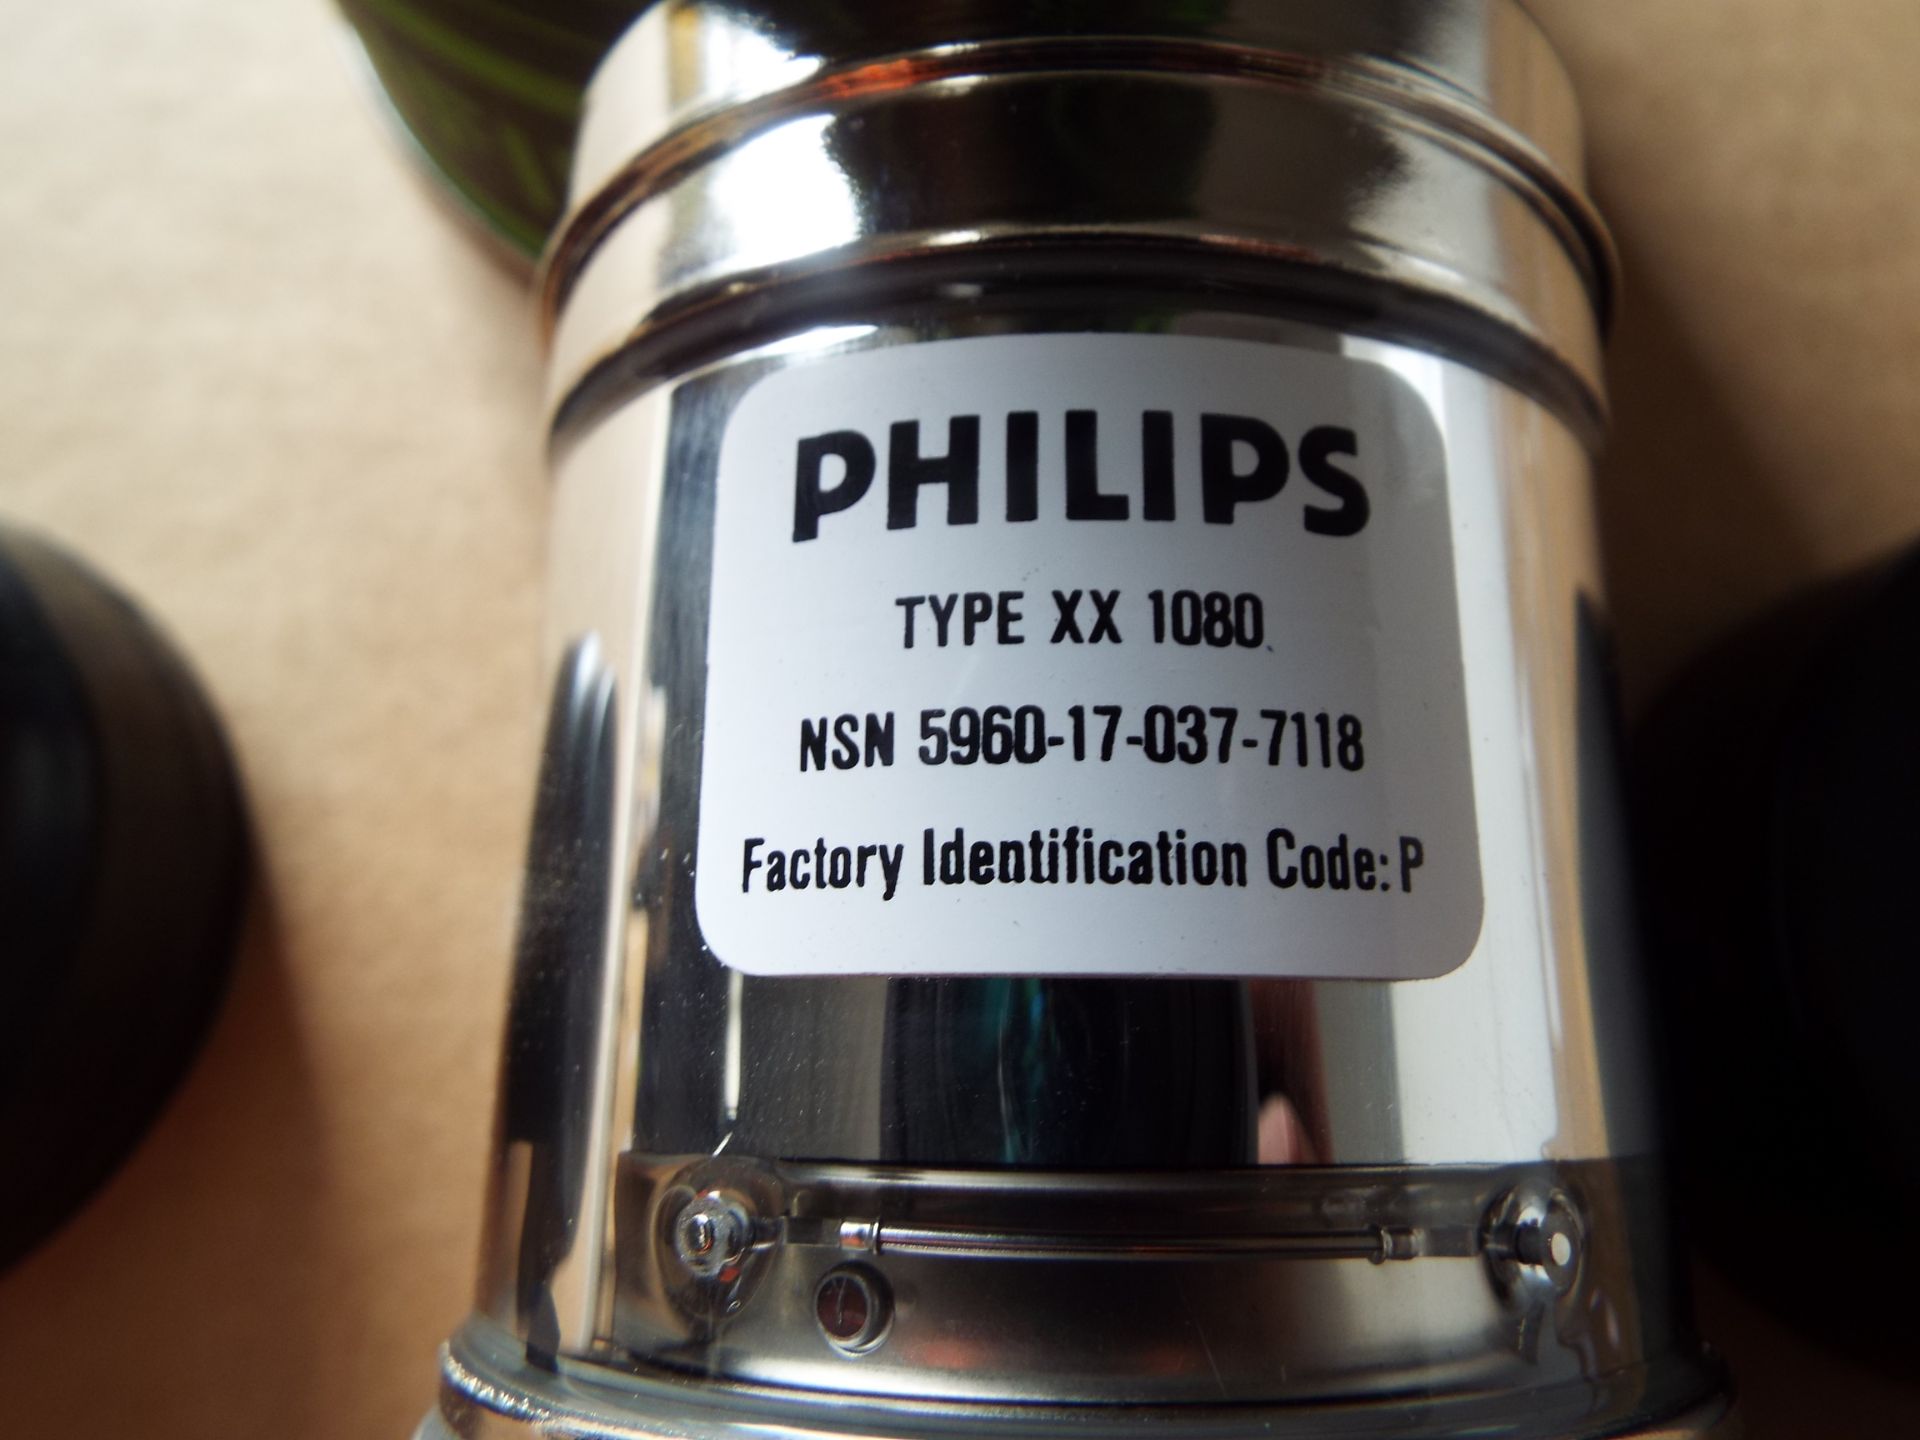 5 x Philips Type XX 1080 Image Intensifier / Night Vision Tubes - Image 3 of 6